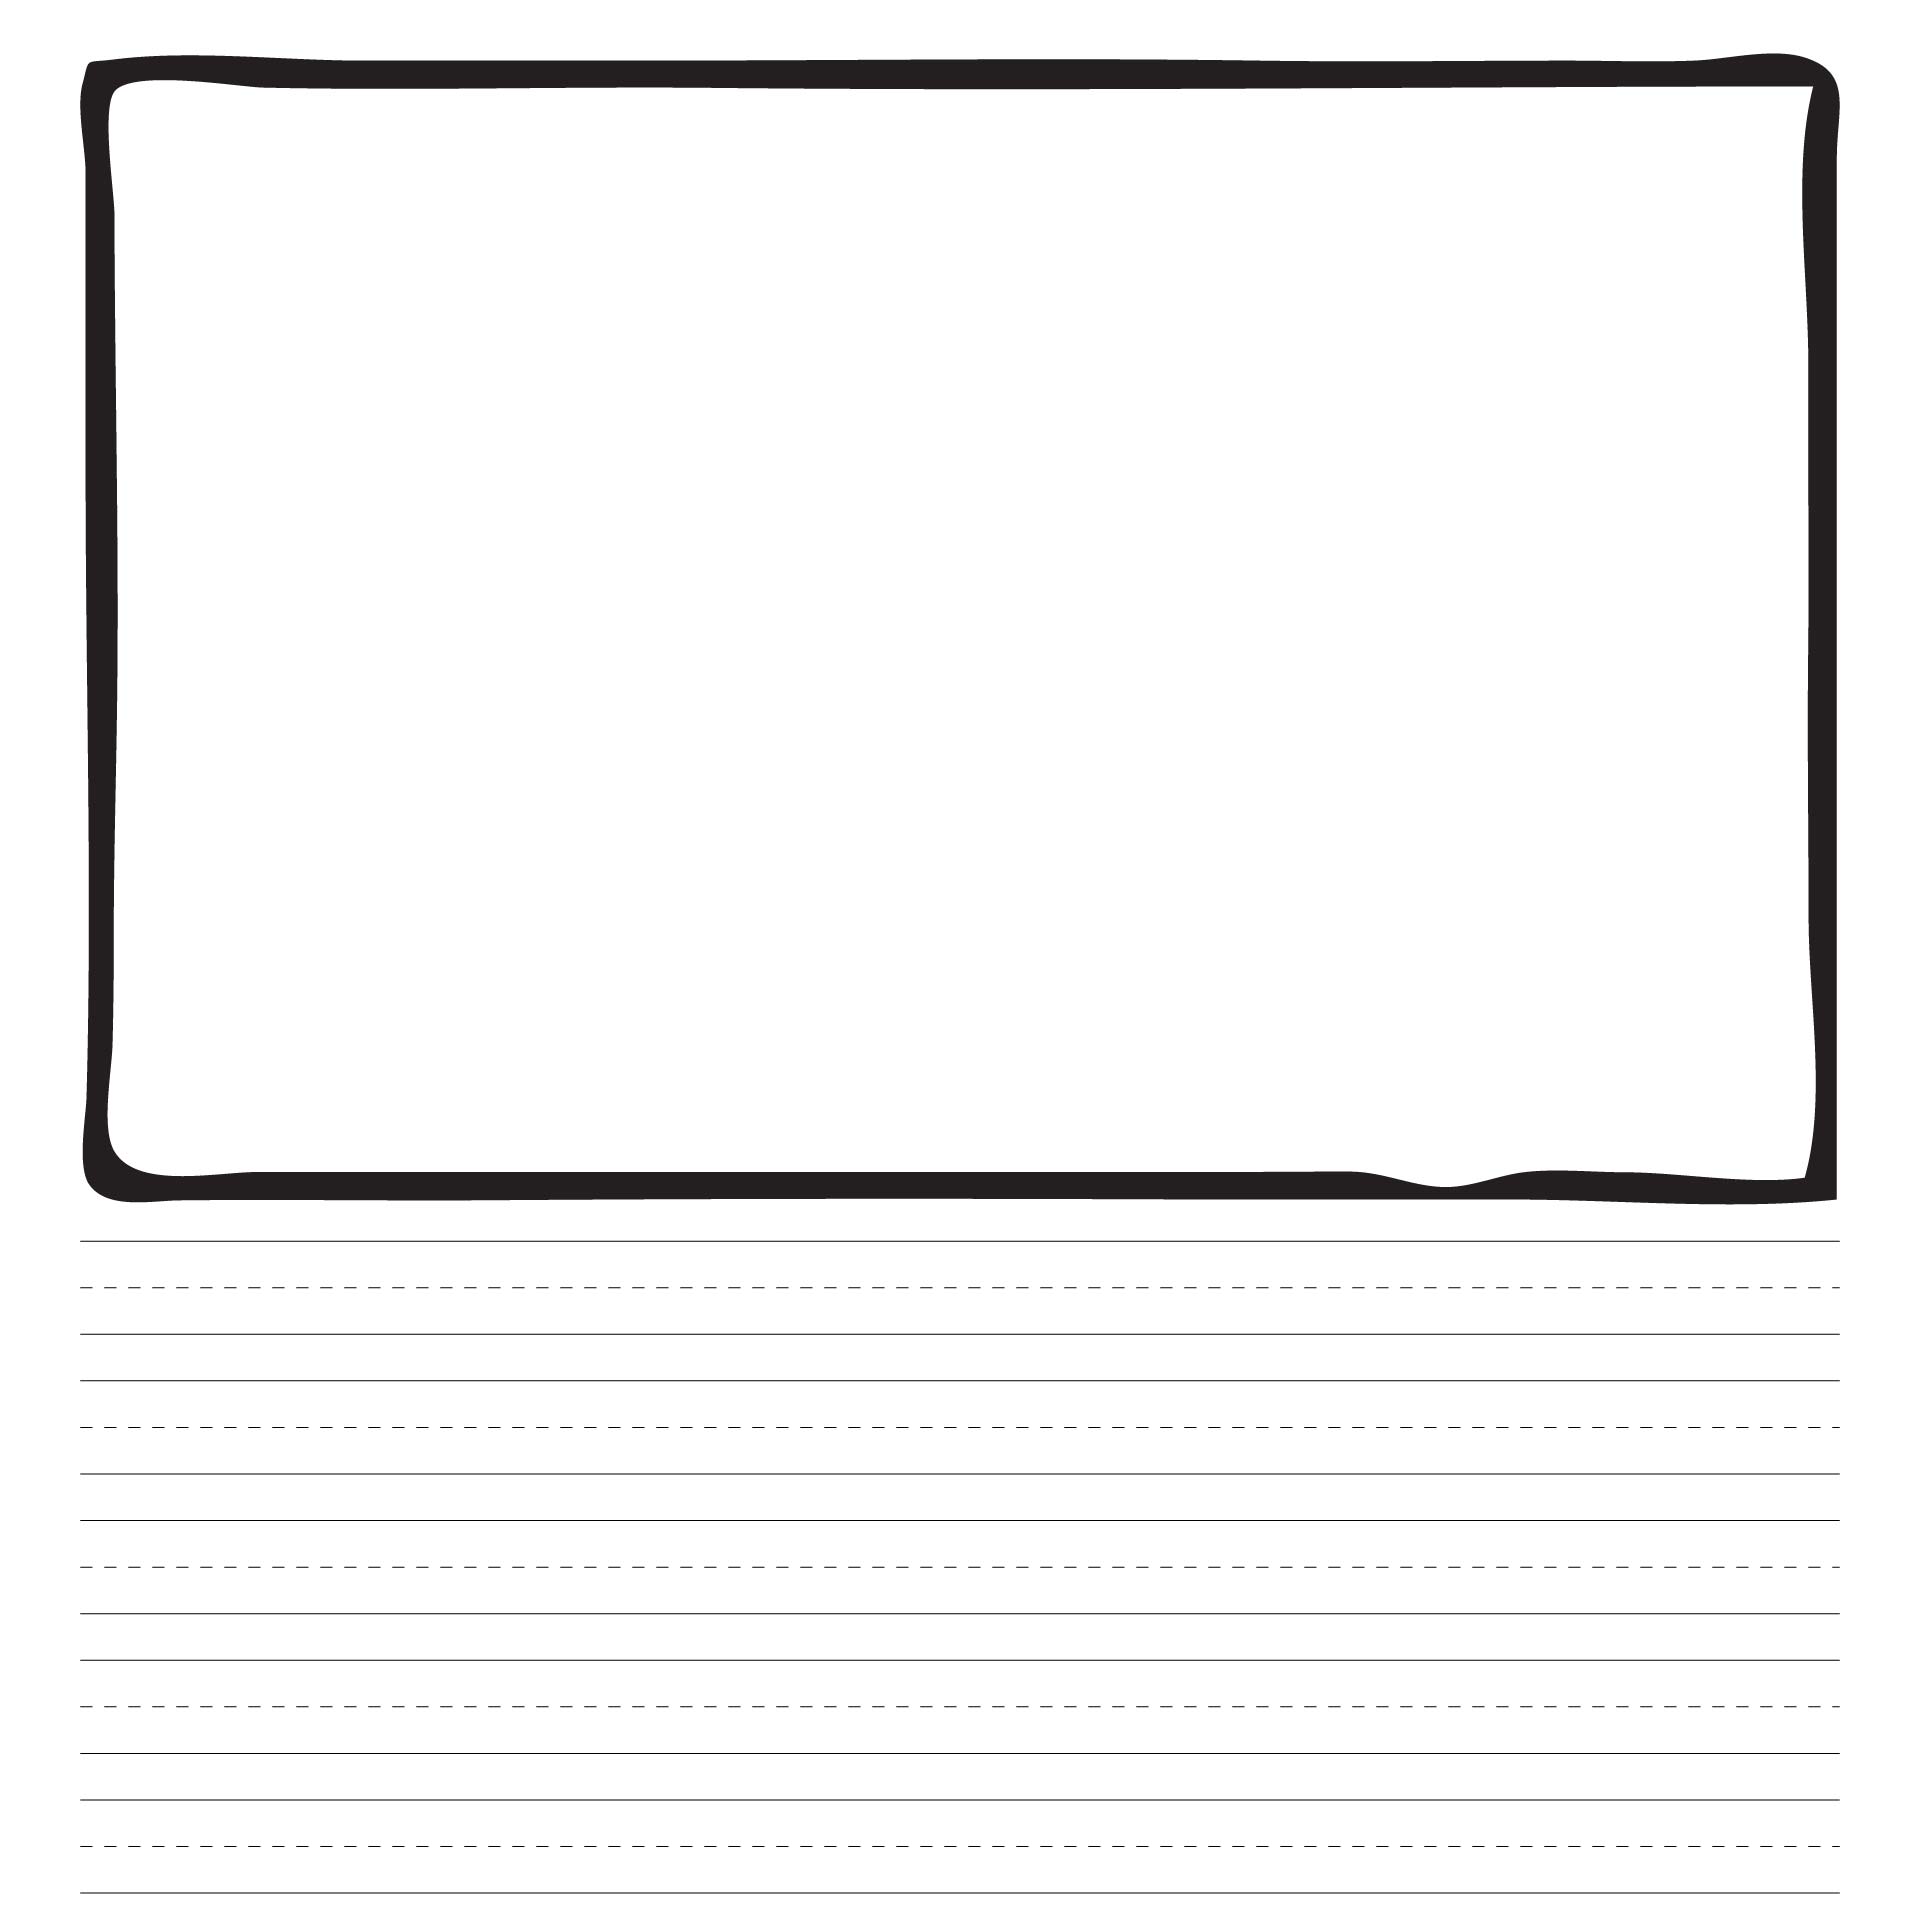 2nd-grade-writing-paper-writing-paper-printable-for-children-activity-shelter-i-m